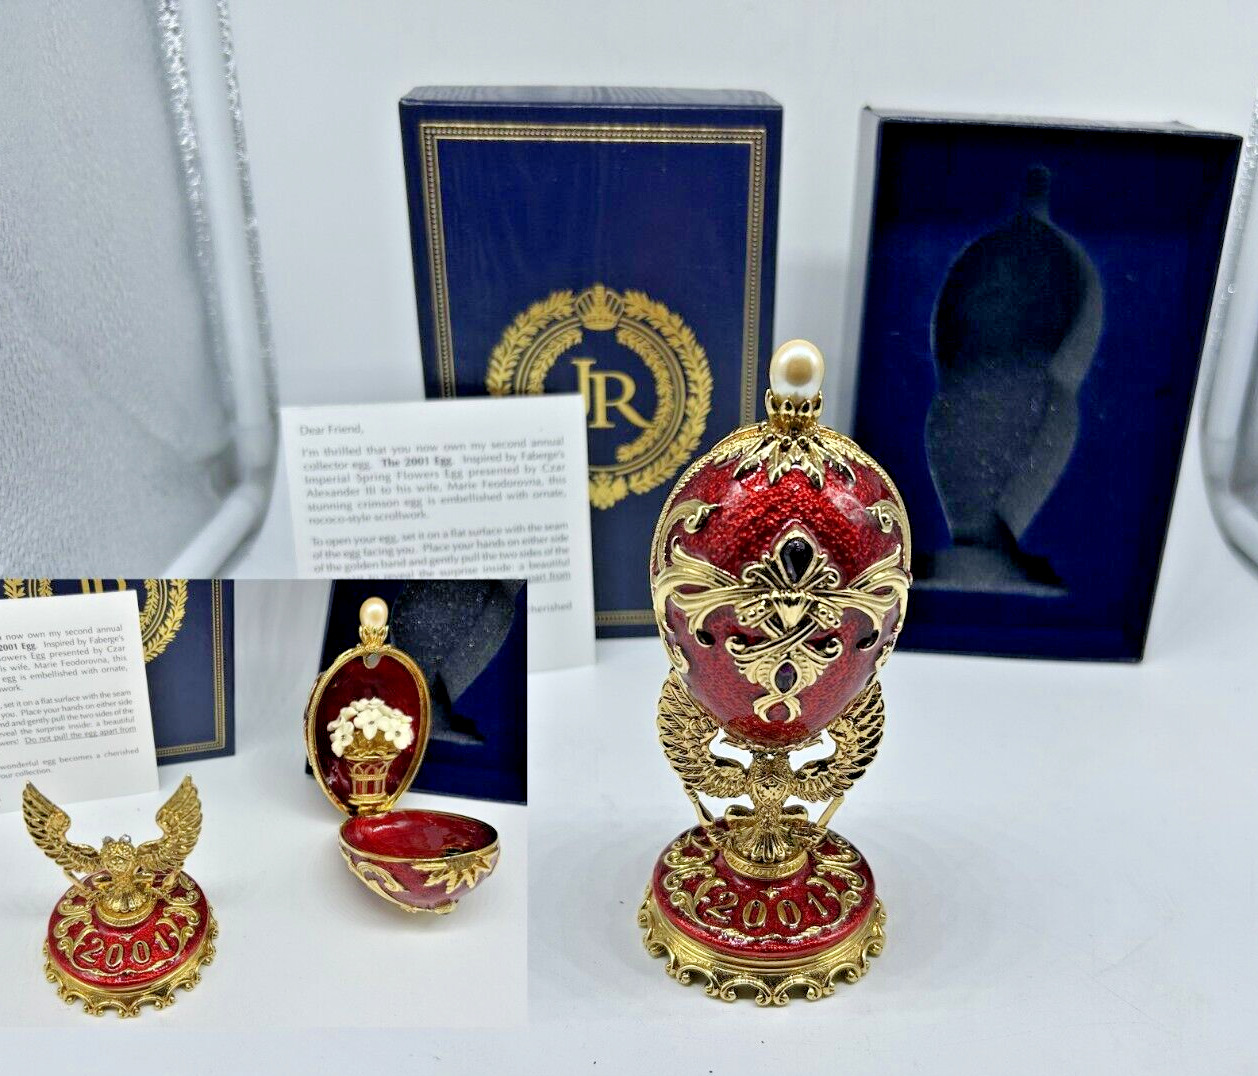 Rare JOAN RIVERS Faberge Inspired 2001 EGG SRING FLOWERS DISCOUNTED due to ISSUE